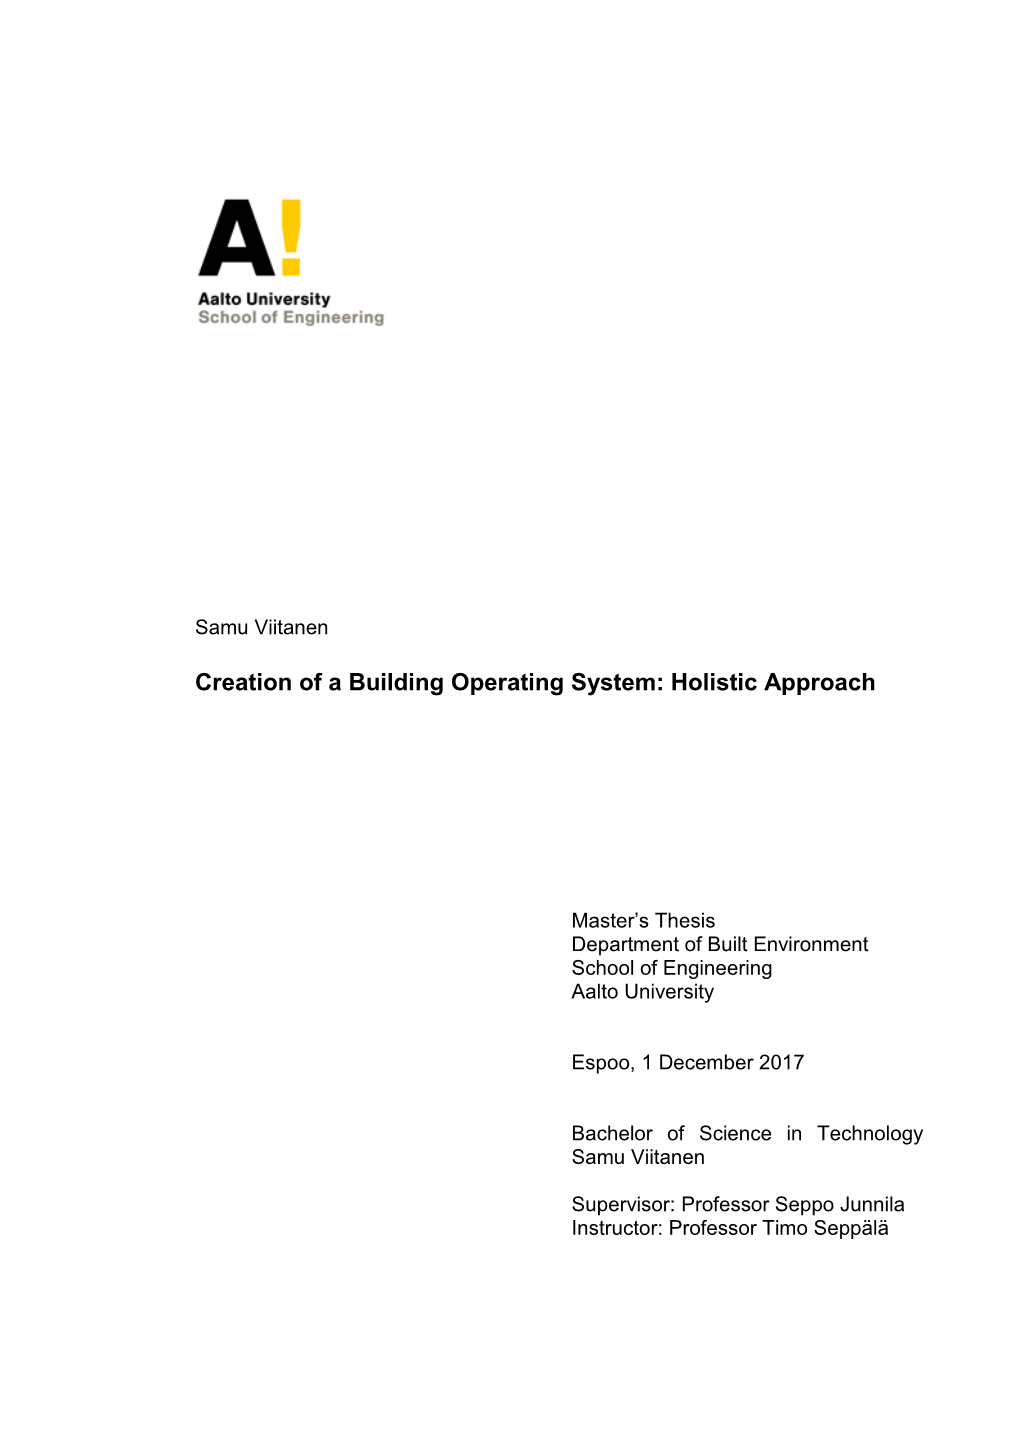 Creation of a Building Operating System: Holistic Approach